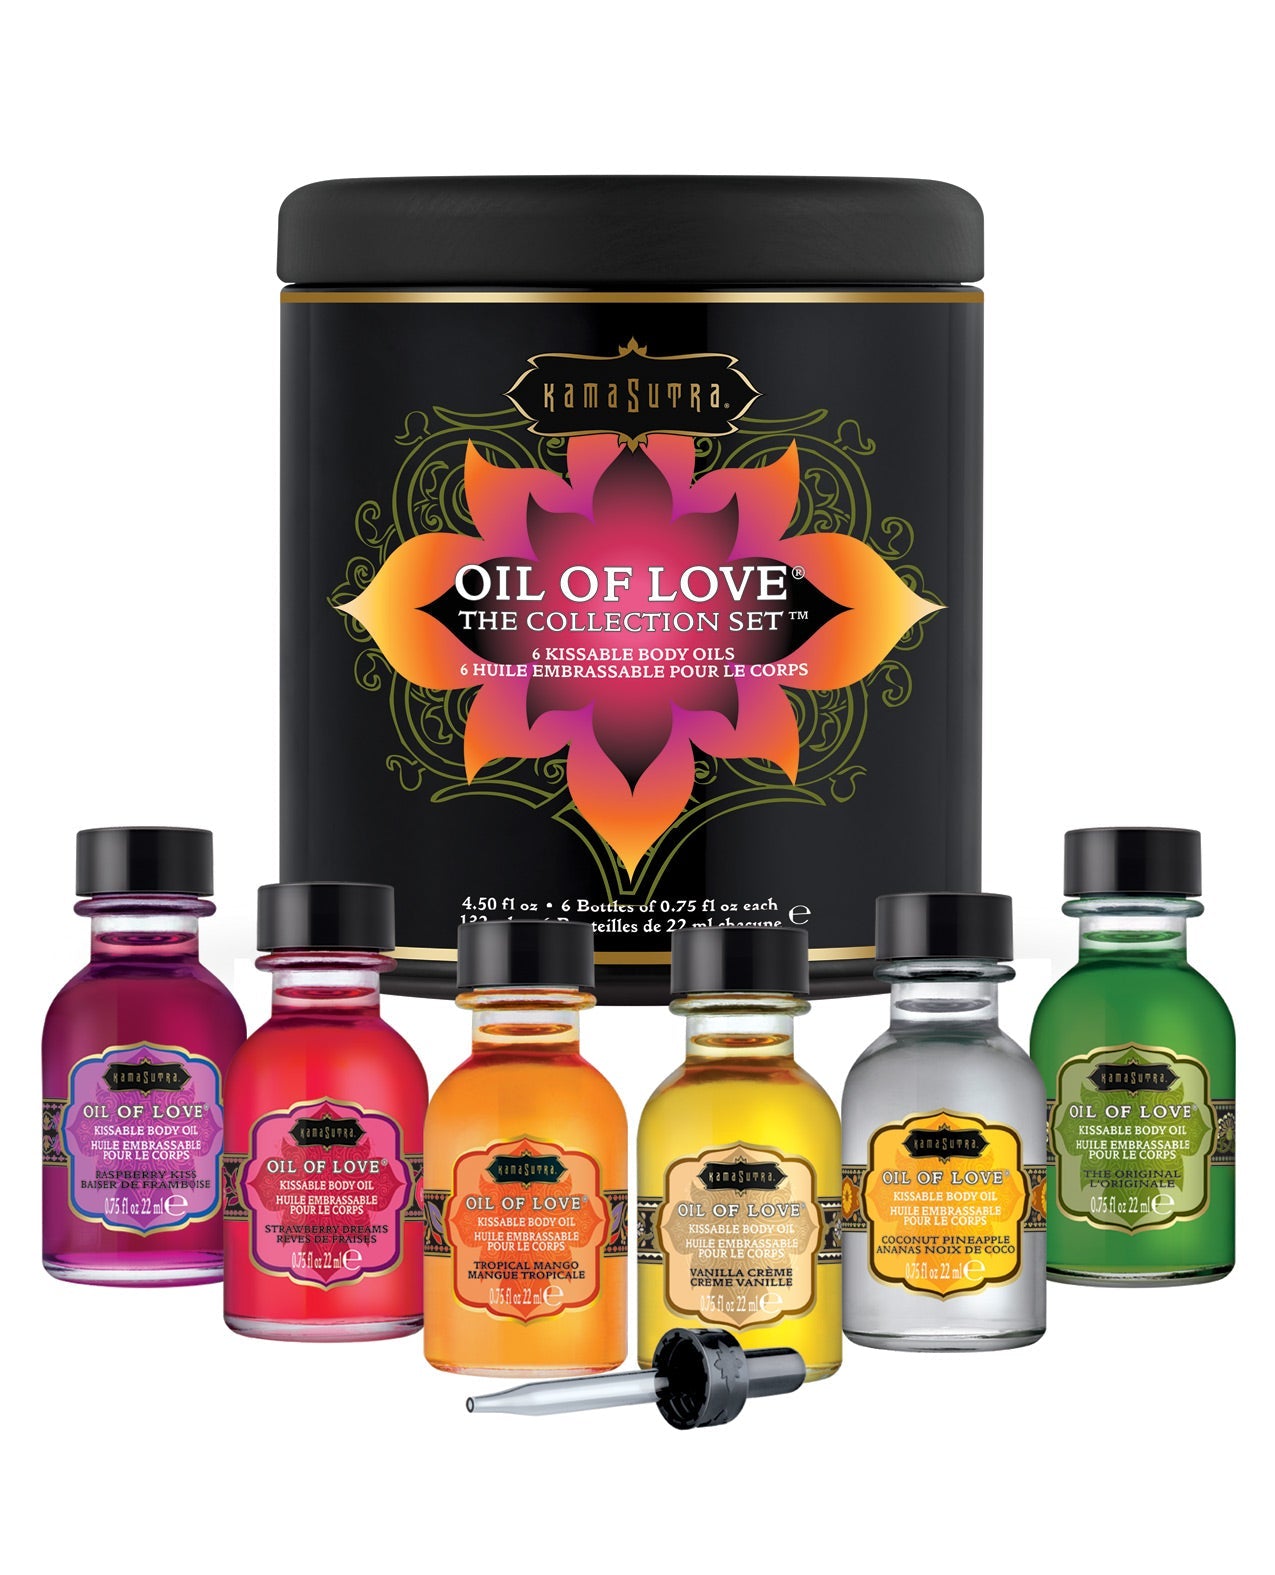 Kama Sutra Oil of Love The Collections Set